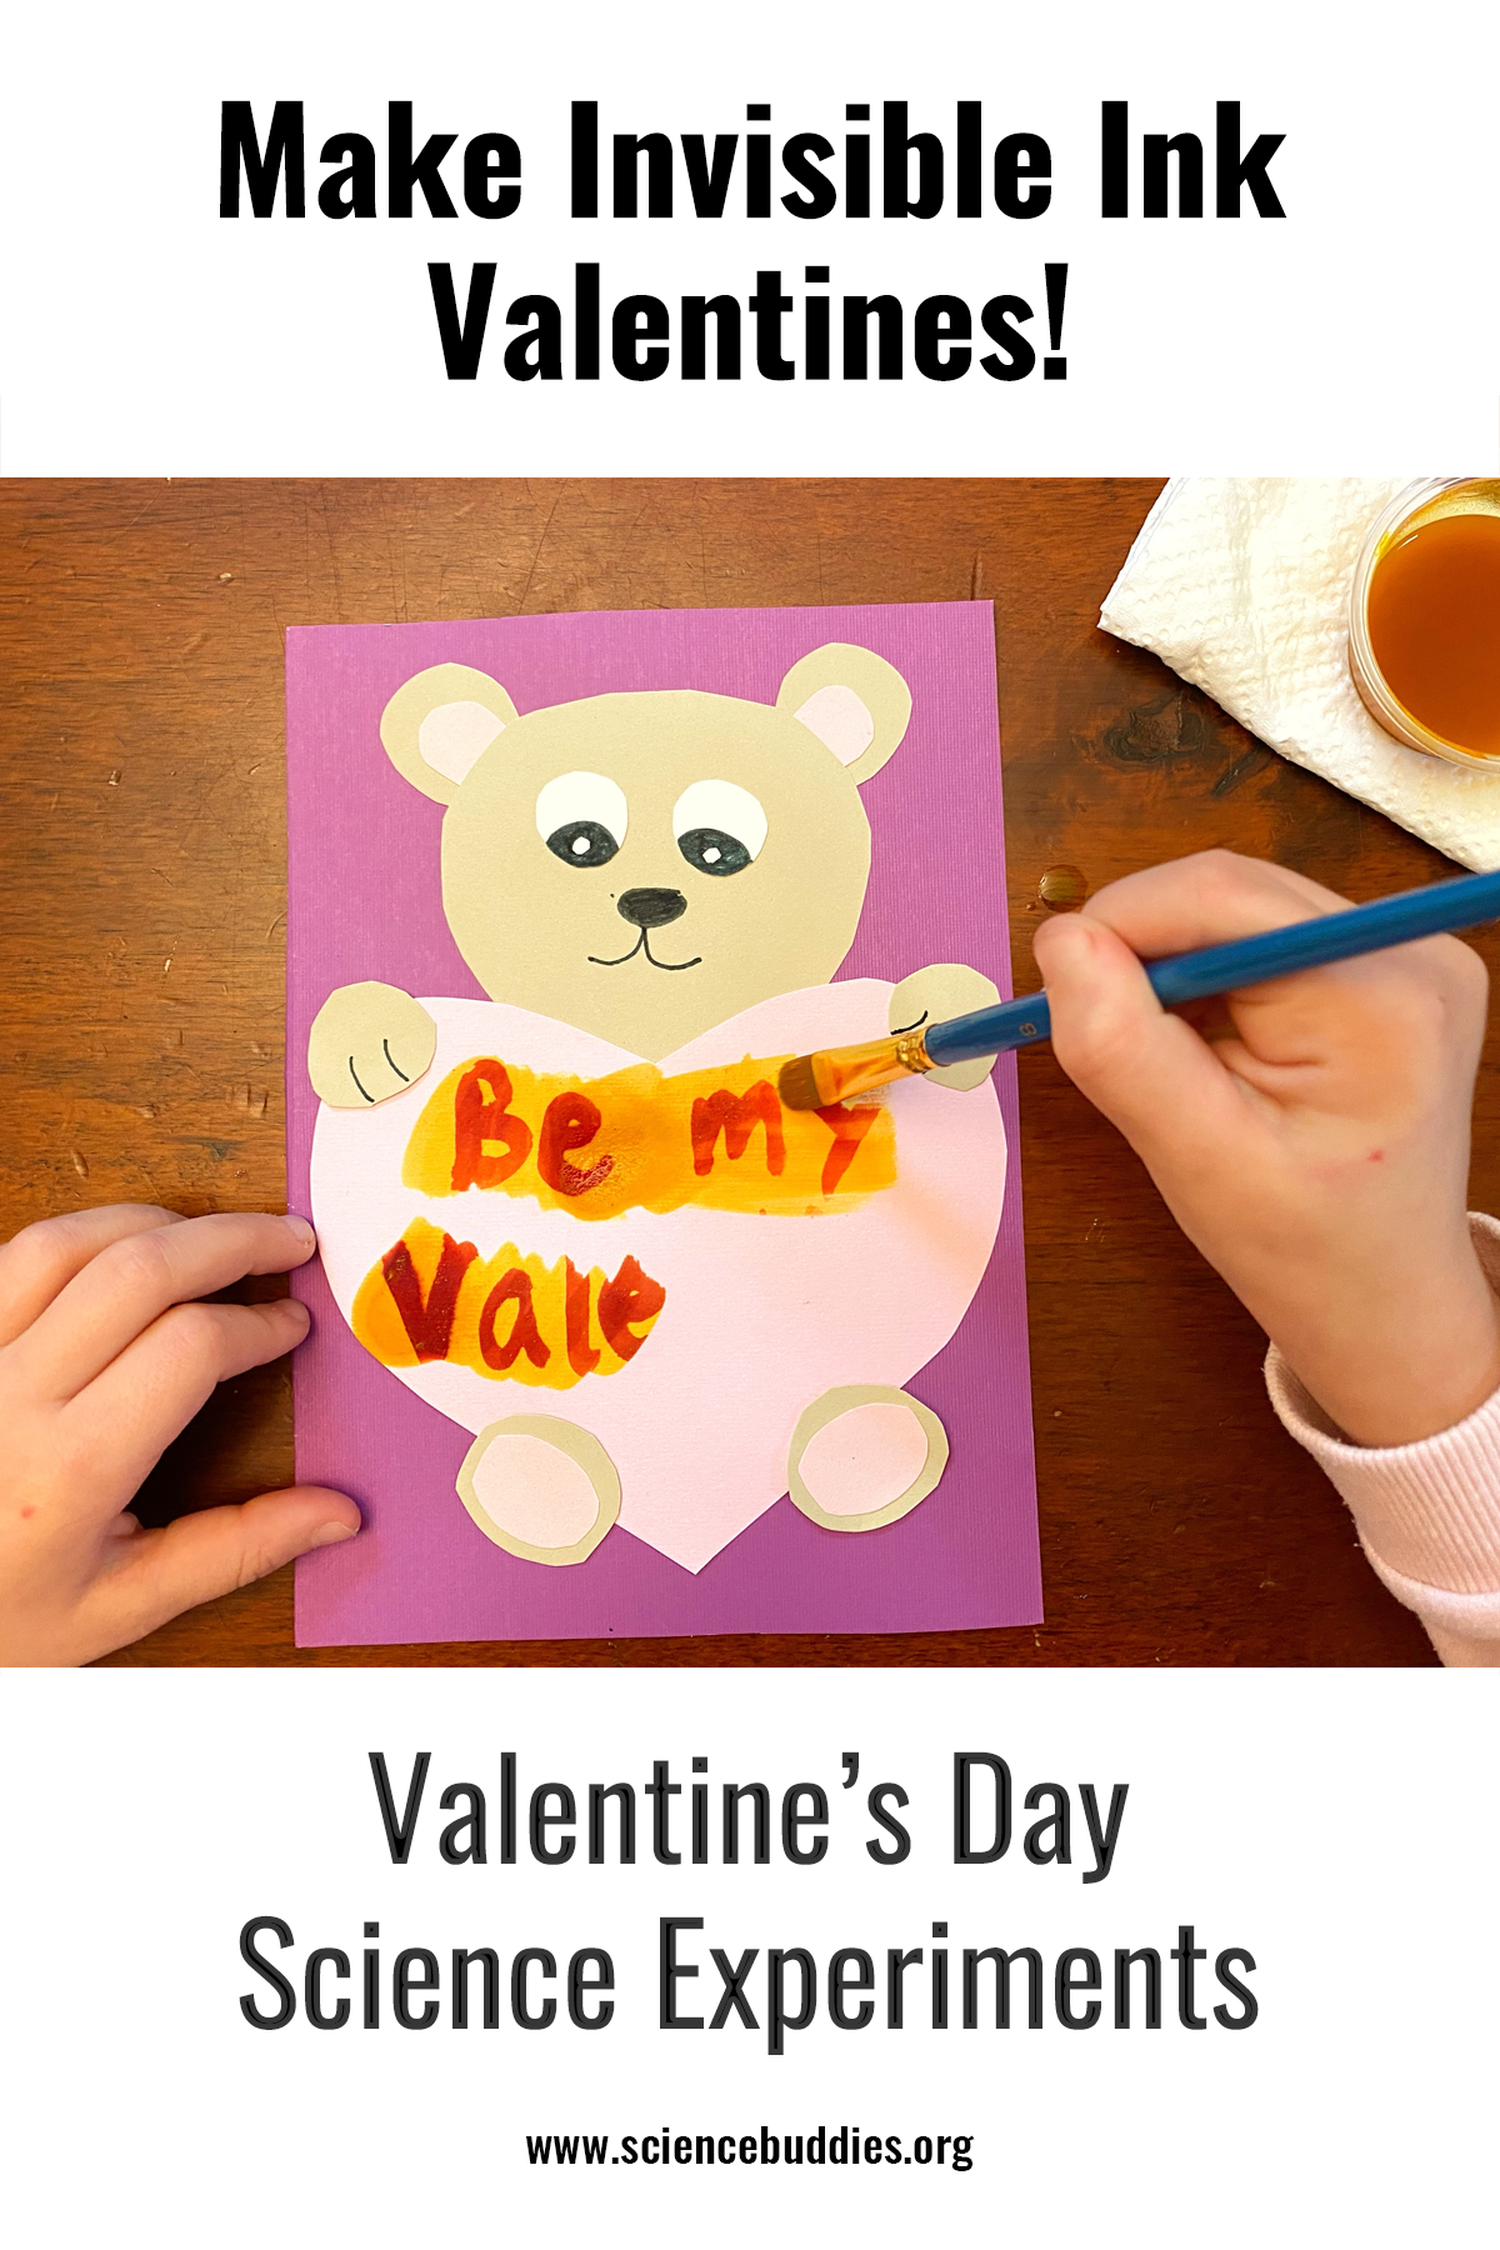 Valentine's Day STEM Experiments - make Valentine's Day cards with invisible ink example